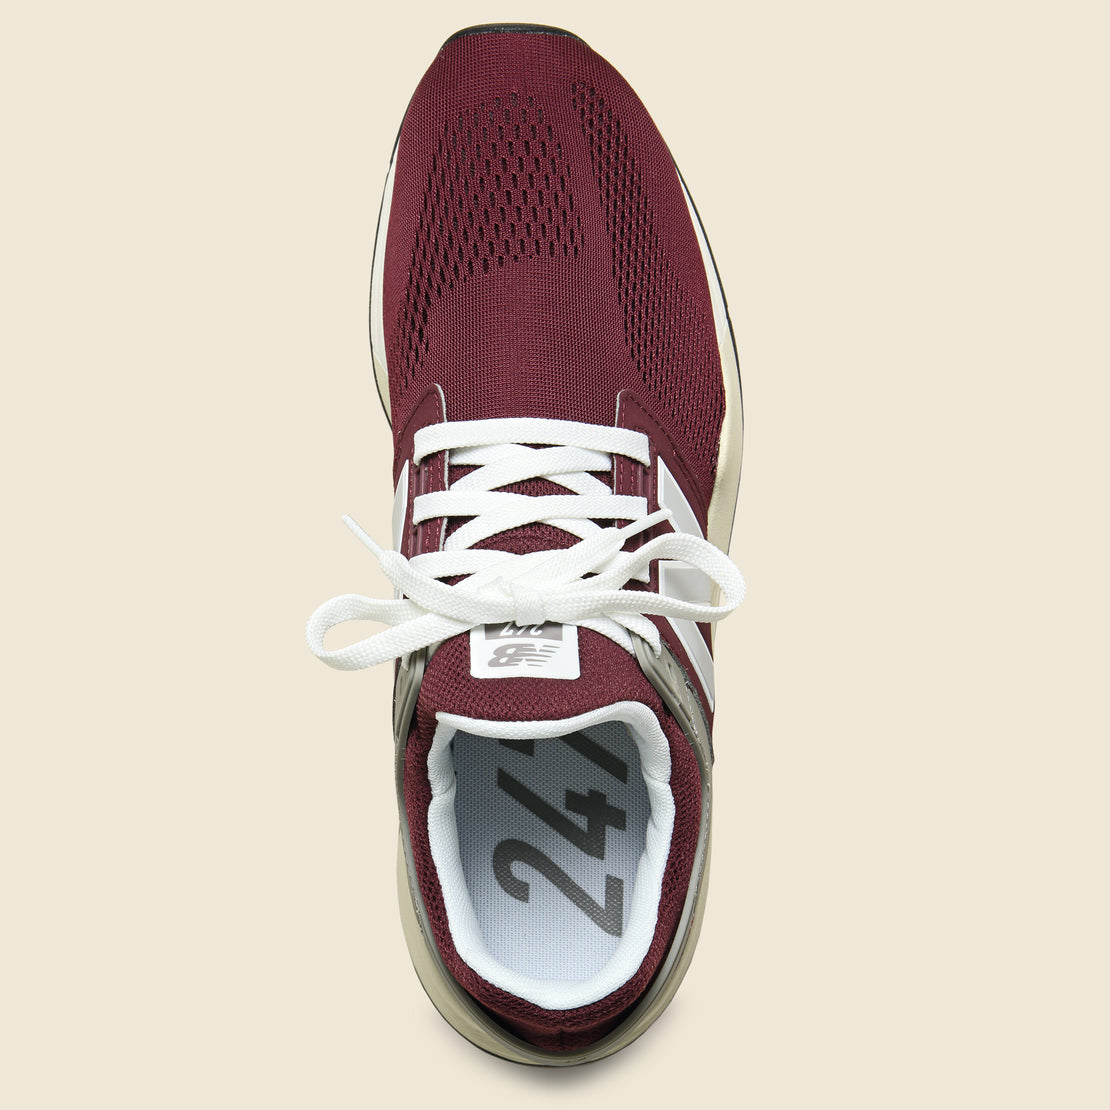 247 Sneaker - Burgundy - New Balance - STAG Provisions - Shoes - Athletic